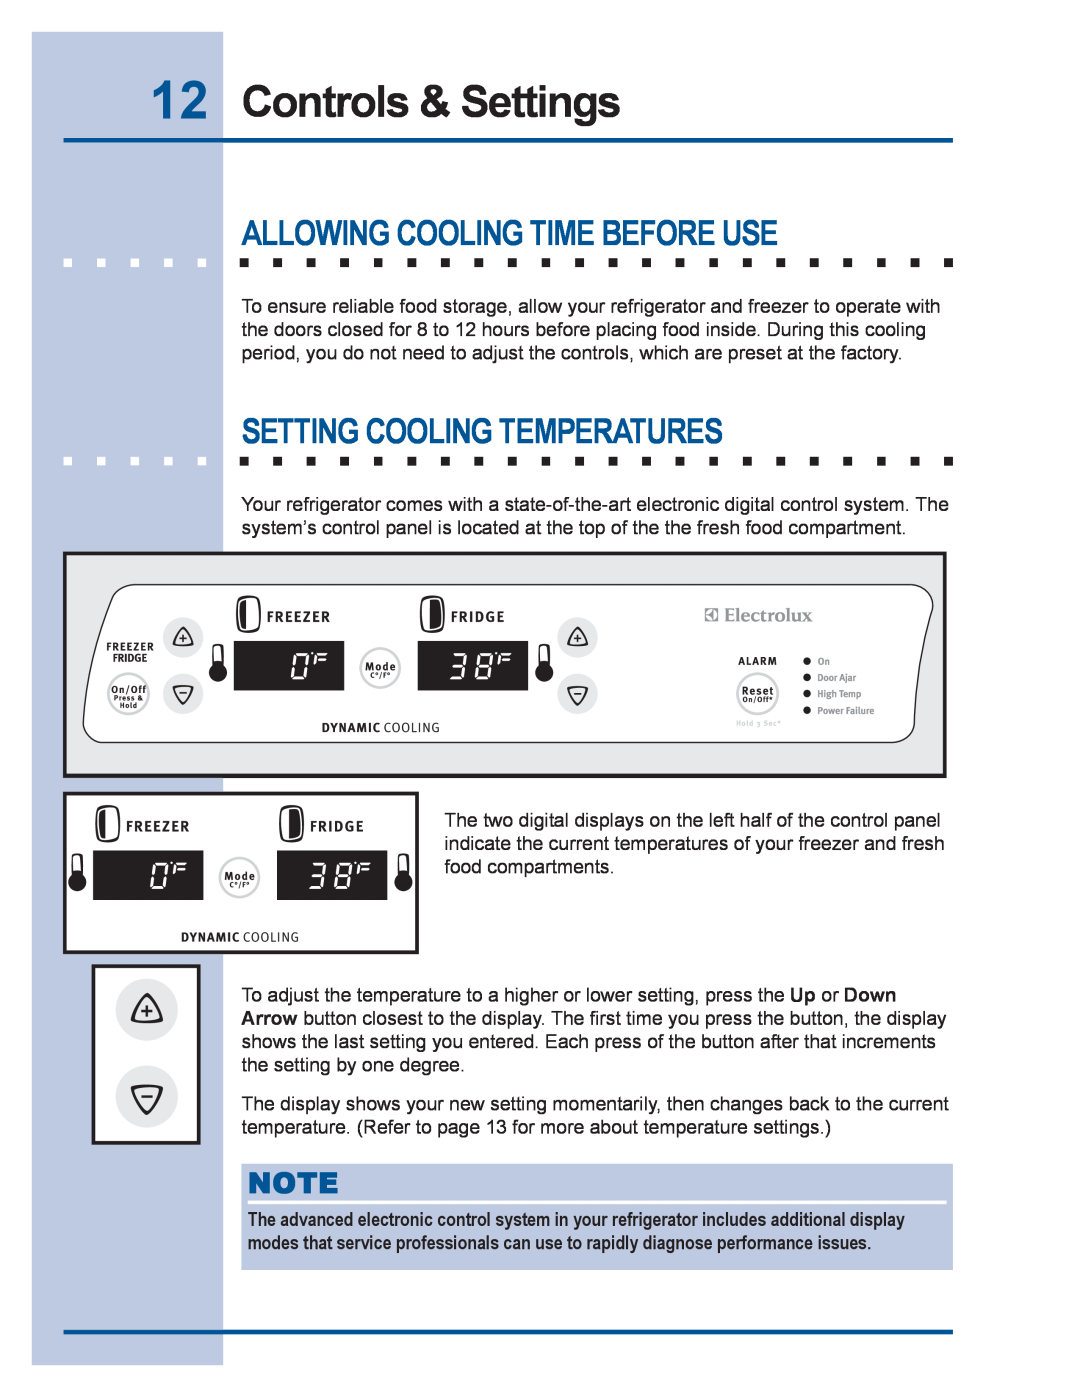 Electrolux 241540102 manual Controls & Settings, Allowing Cooling Time Before Use, Setting Cooling Temperatures 